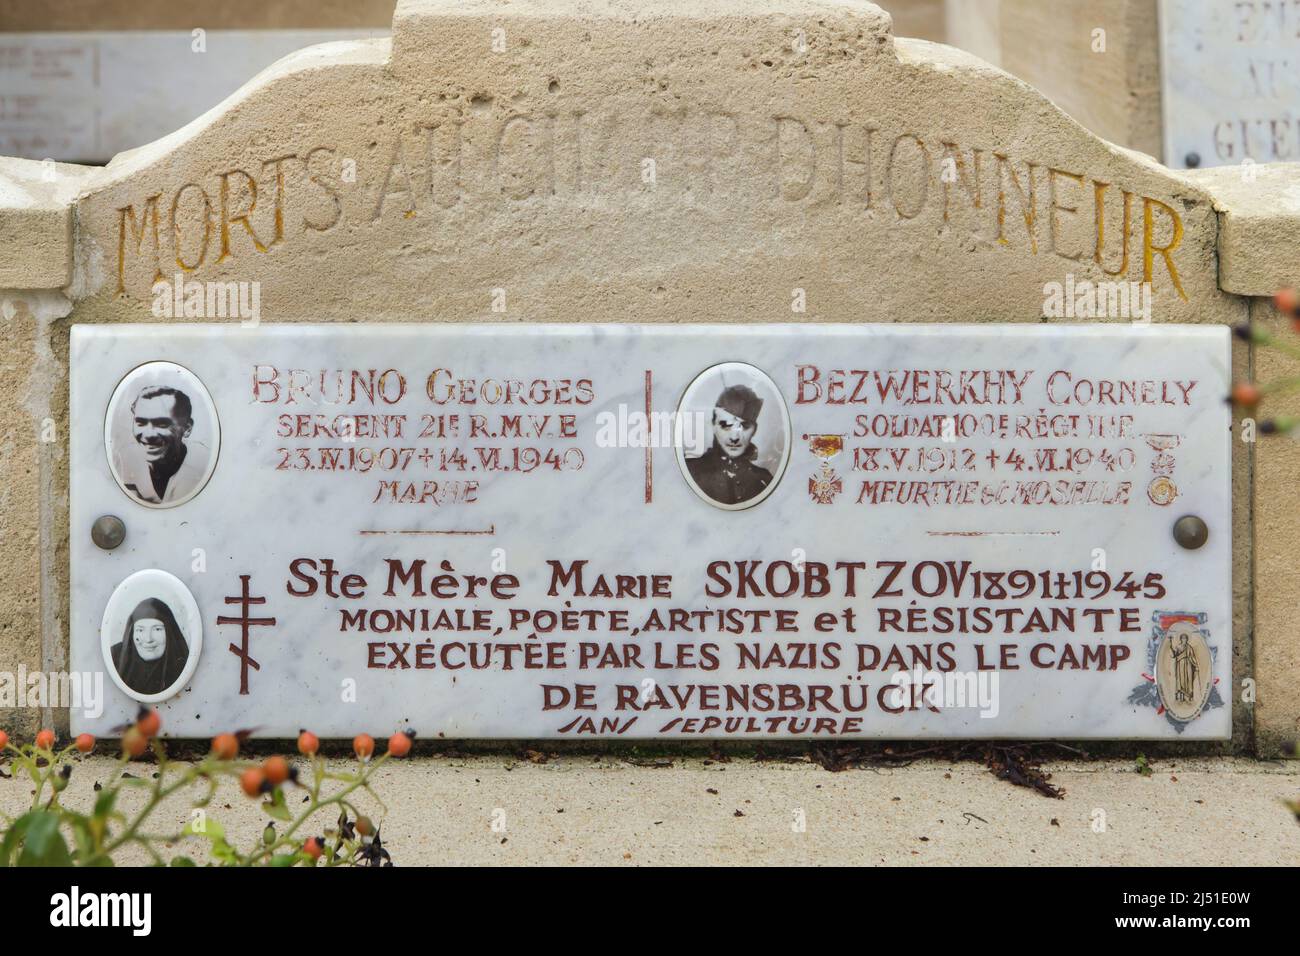 Commemorative plaque devoted to Russian noblewoman Maria Skobtsova (1891-1945) also known as Mother Maria in the Memorial chapel devoted to Russian white emigrants who attended the French Resistance during the Second World War at the Russian Cemetery in Sainte-Geneviève-des-Bois (Cimetière russe de Sainte-Geneviève-des-Bois) near Paris, France. Russian soldiers of the French Army Georges Bruno (1907-1940) and Cornely Bezwerkhy (1912-1940) who died during the Battle of France during World War II are also listed on the plaque. Stock Photo